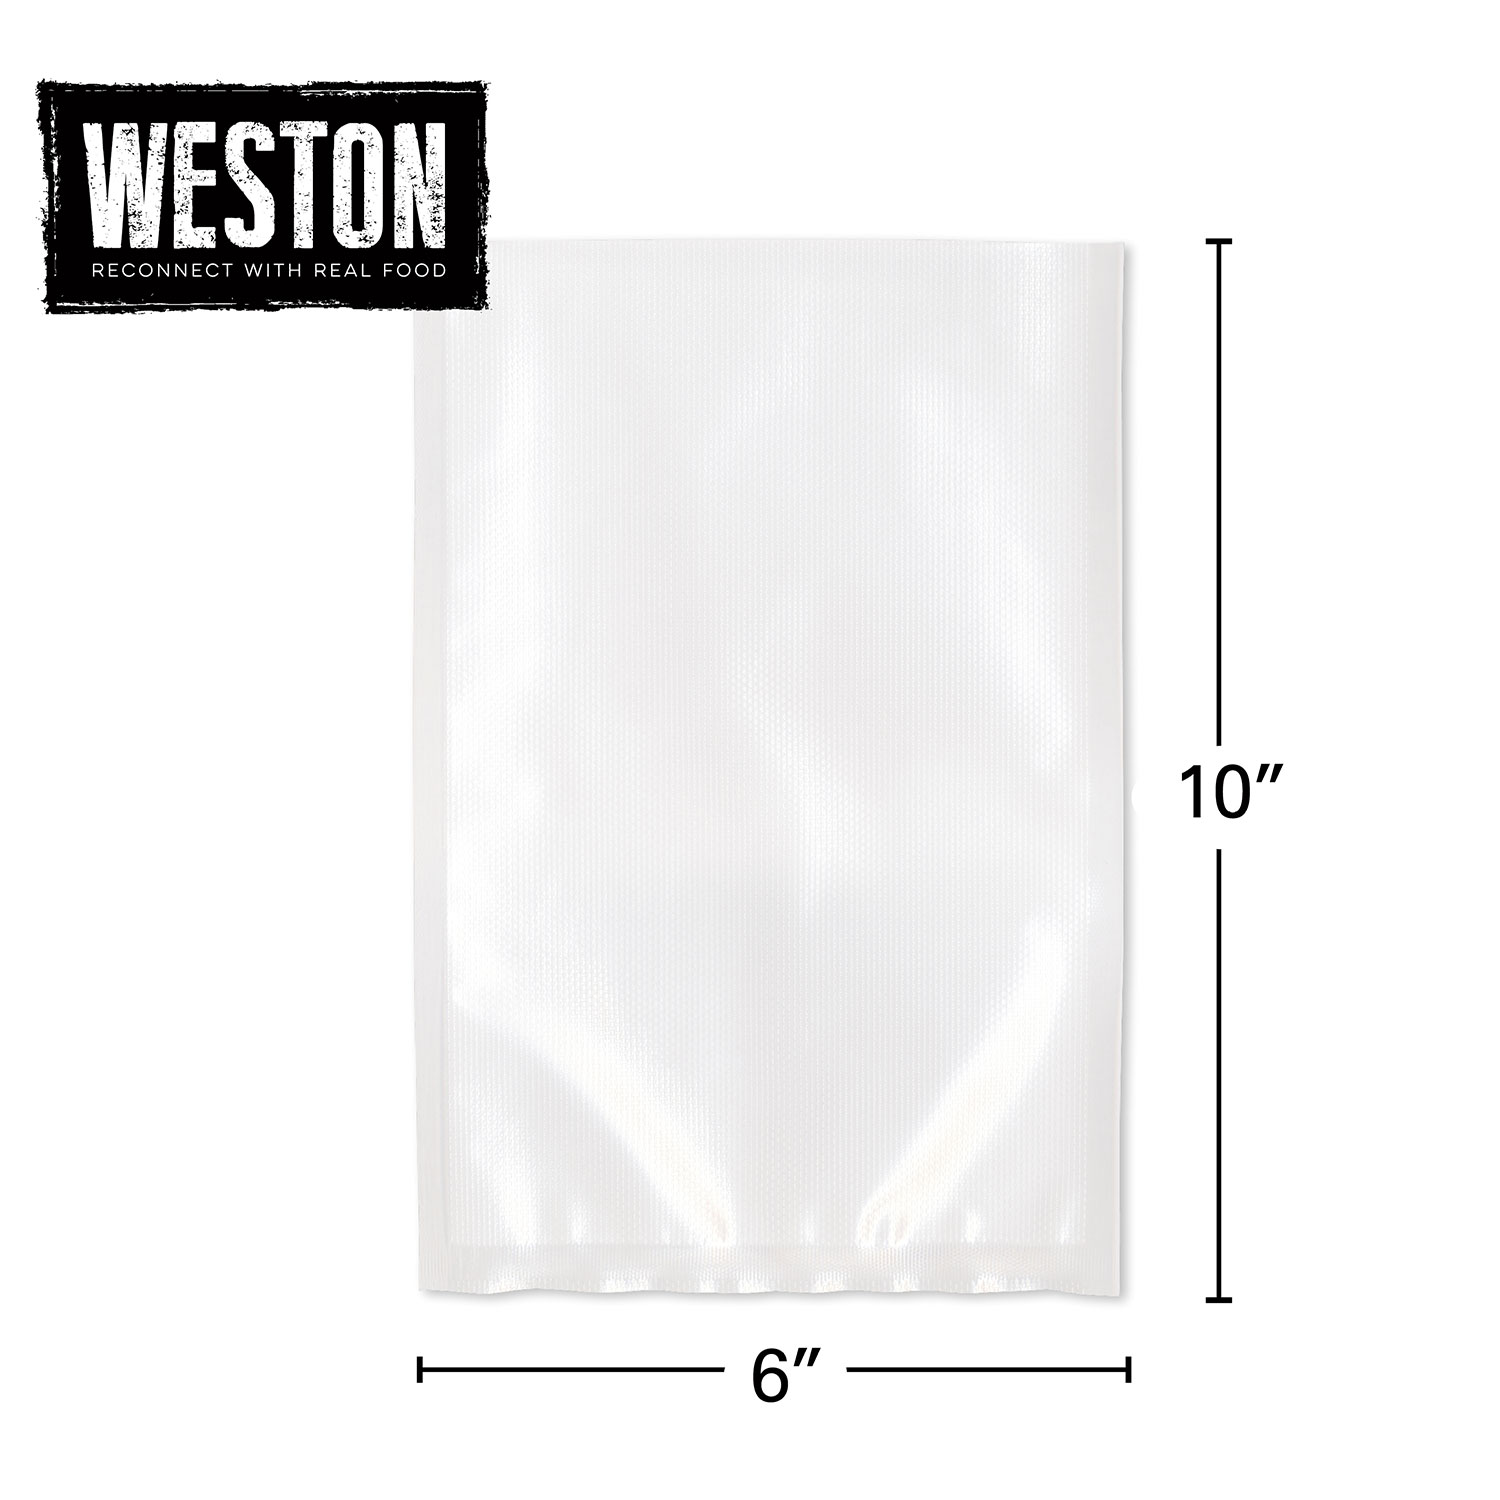 Wevac Vacuum Sealer Bags 100 Pint 6x10 inch for Food Saver, Seal A Meal, Weston. Commercial Grade, BPA Free, Heavy Duty, Great F